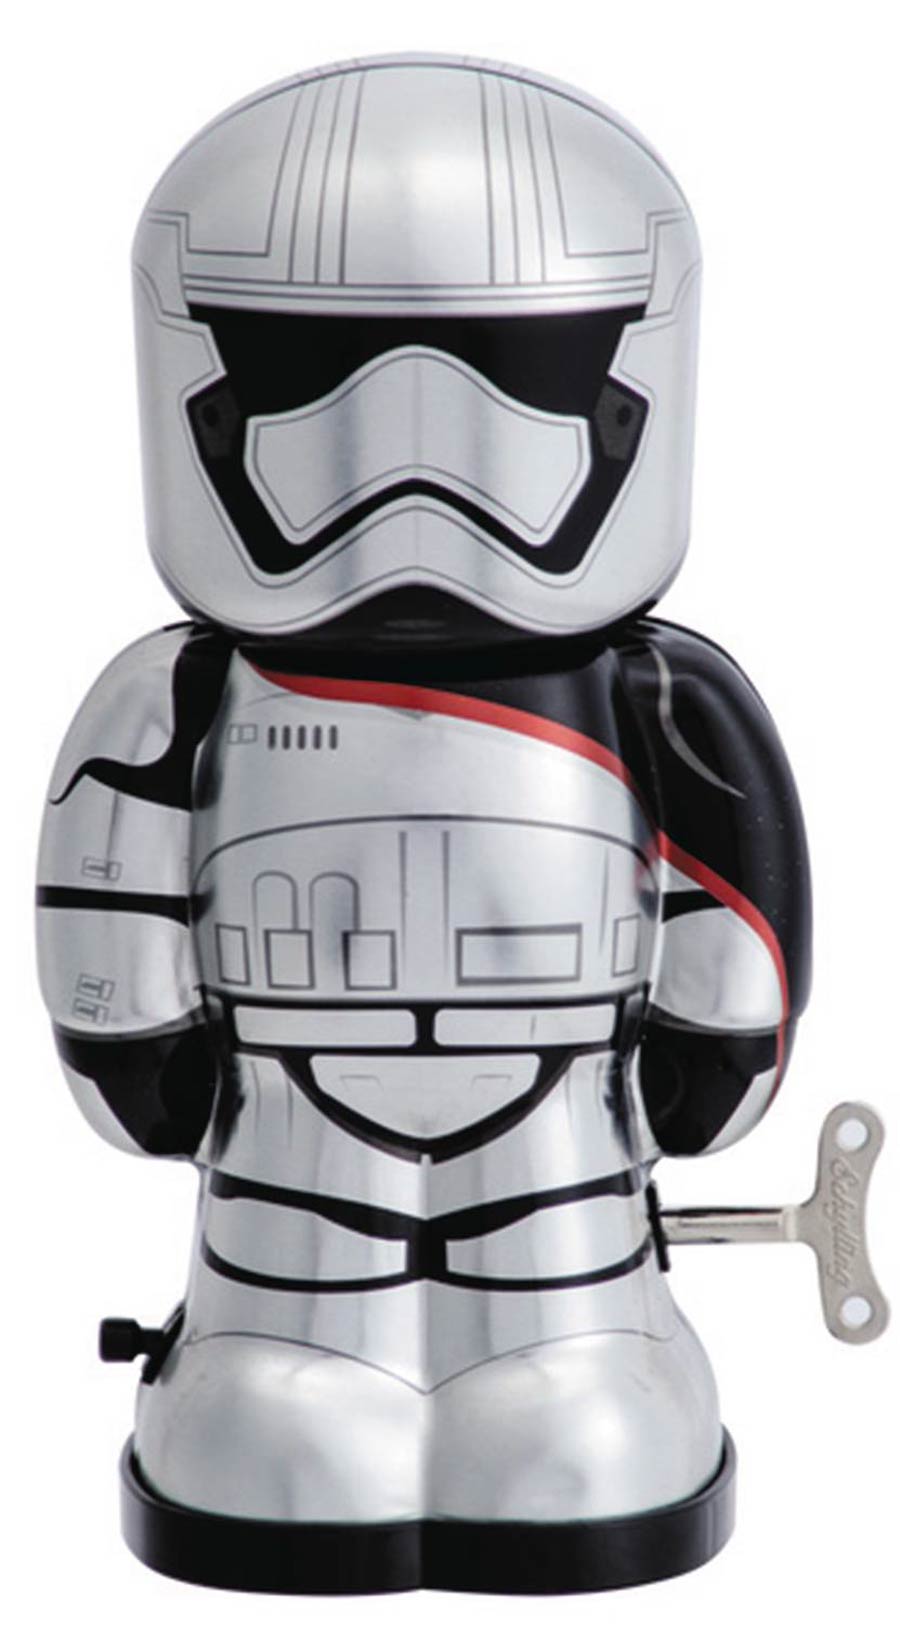 Star Wars Episode VII The Force Awakens Wind-Up Tin Toy - Captain Phasma